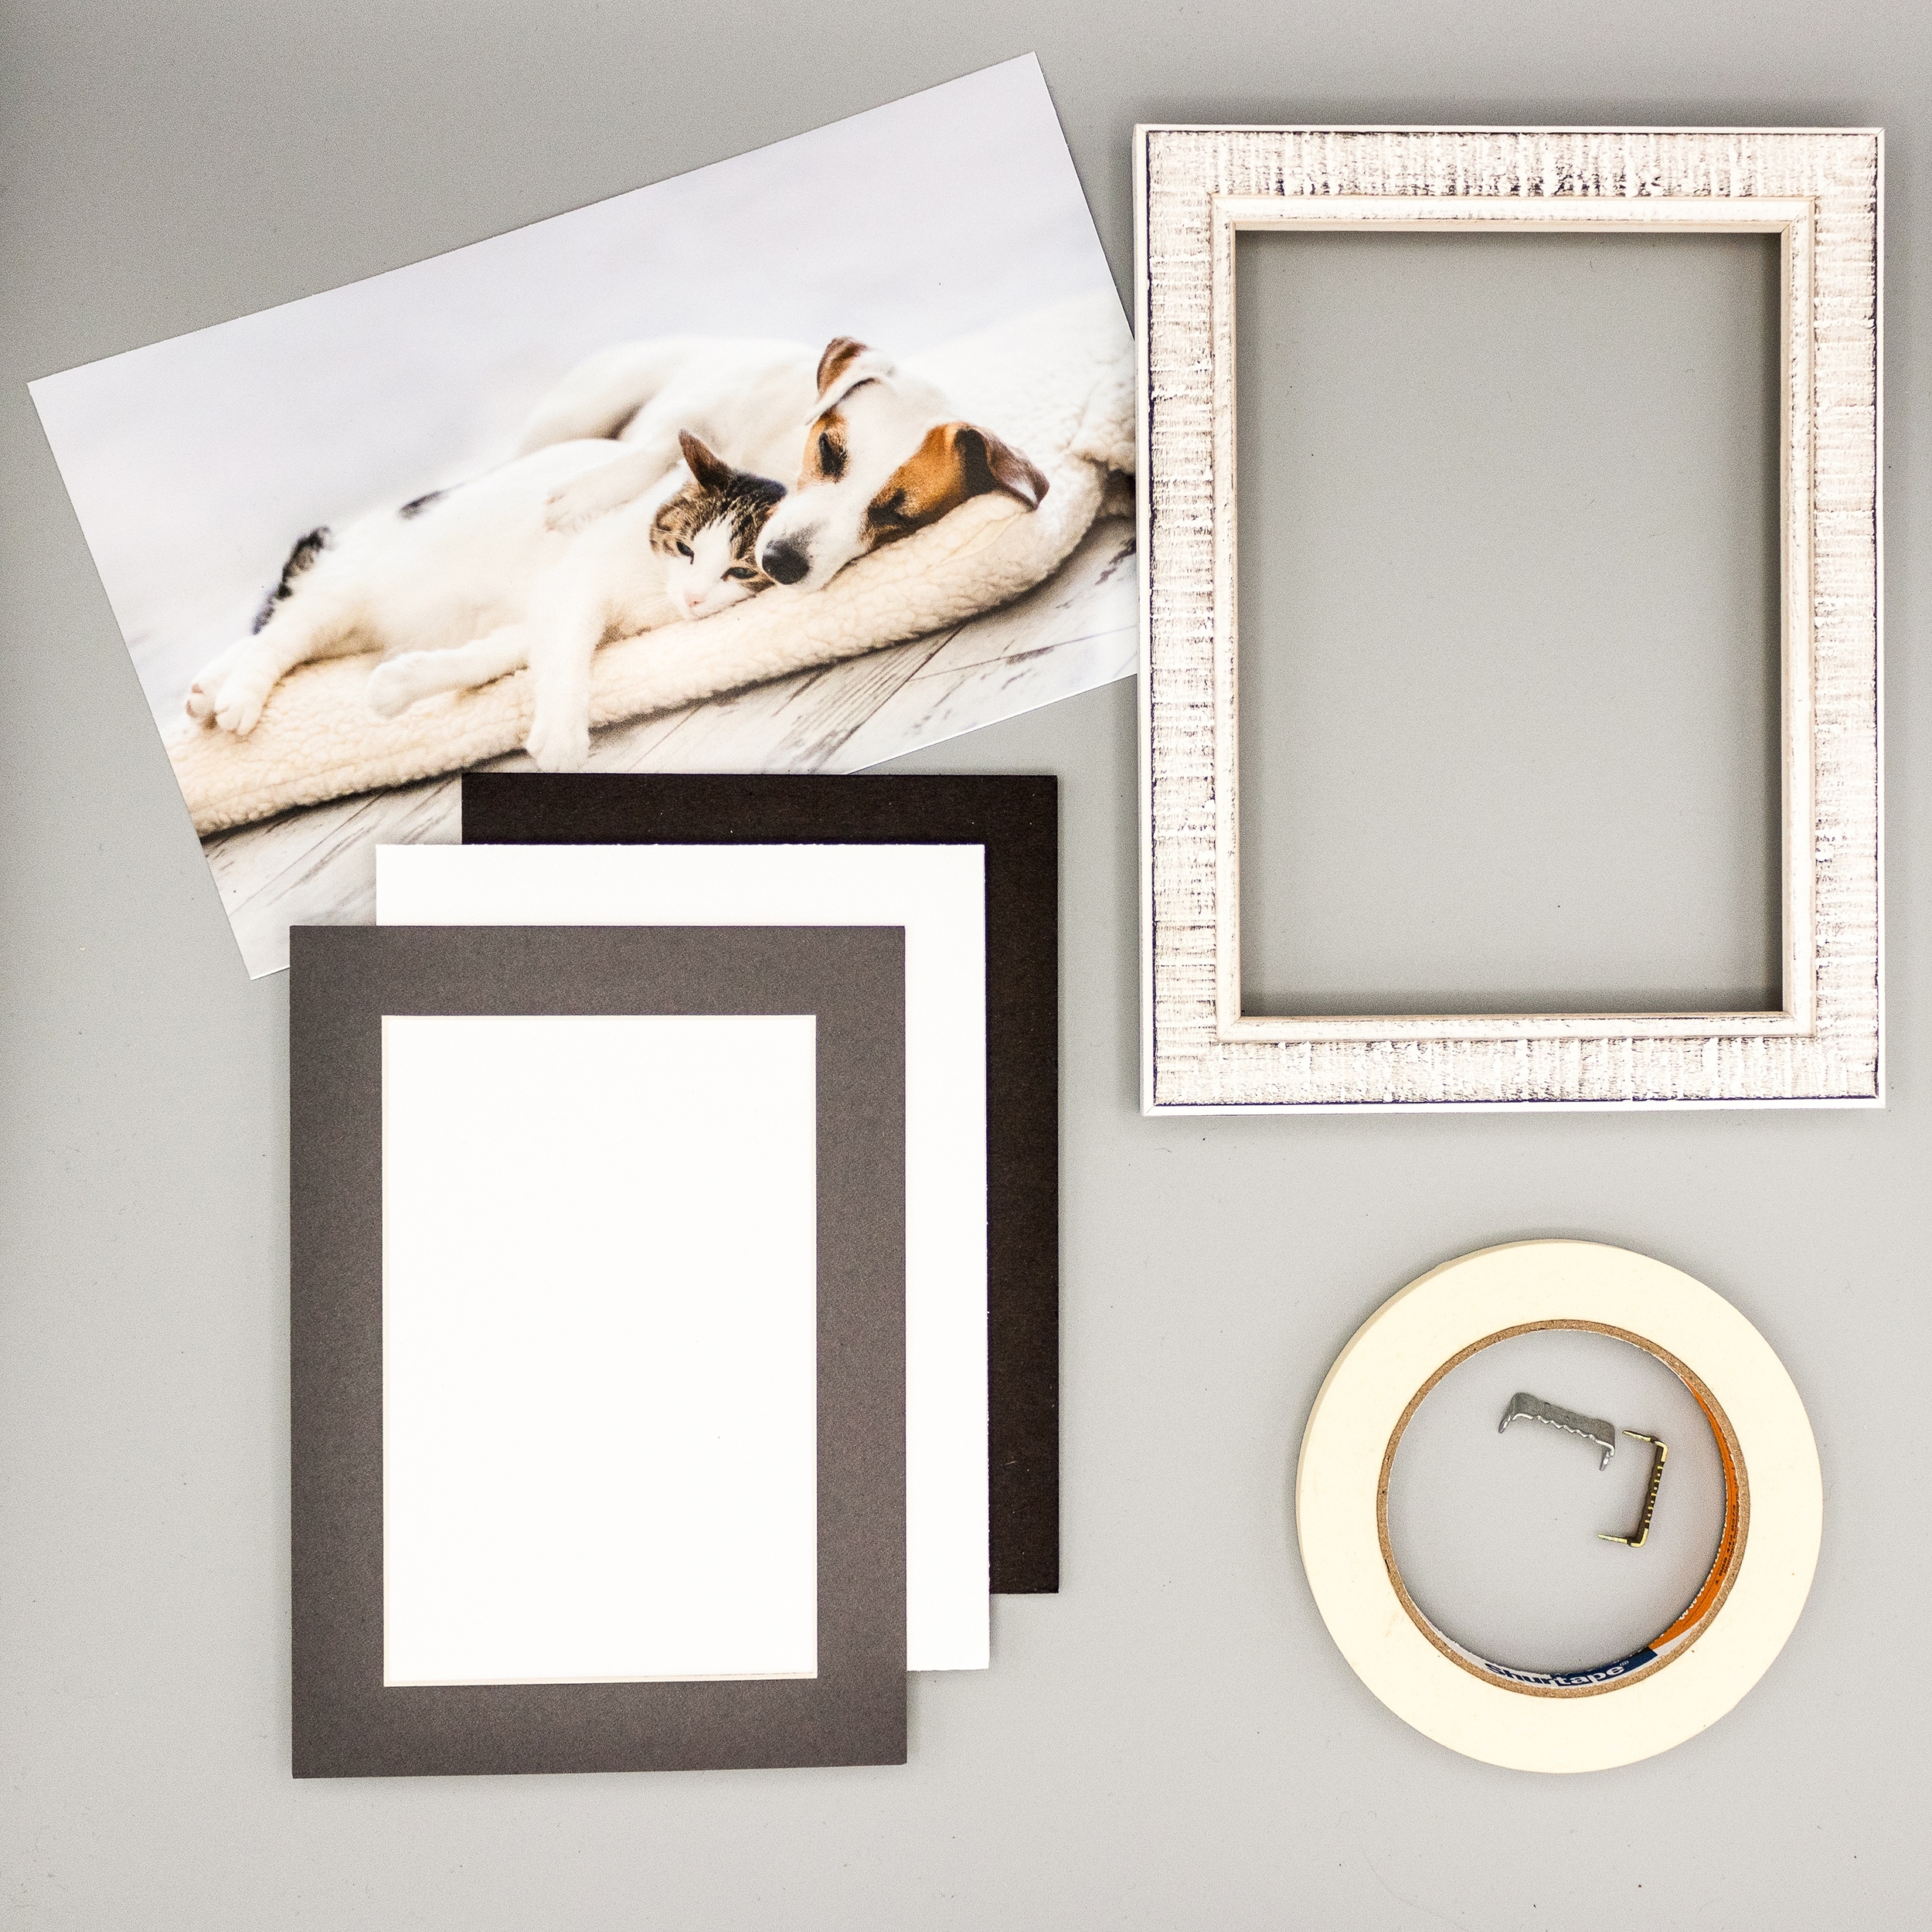 5x7 Mat for 8x10 Frame - Precut Mat Board Acid-Free Charcoal 5x7 Photo Matte  Made to Fit a 8x10 Picture Frame - Bed Bath & Beyond - 38873301